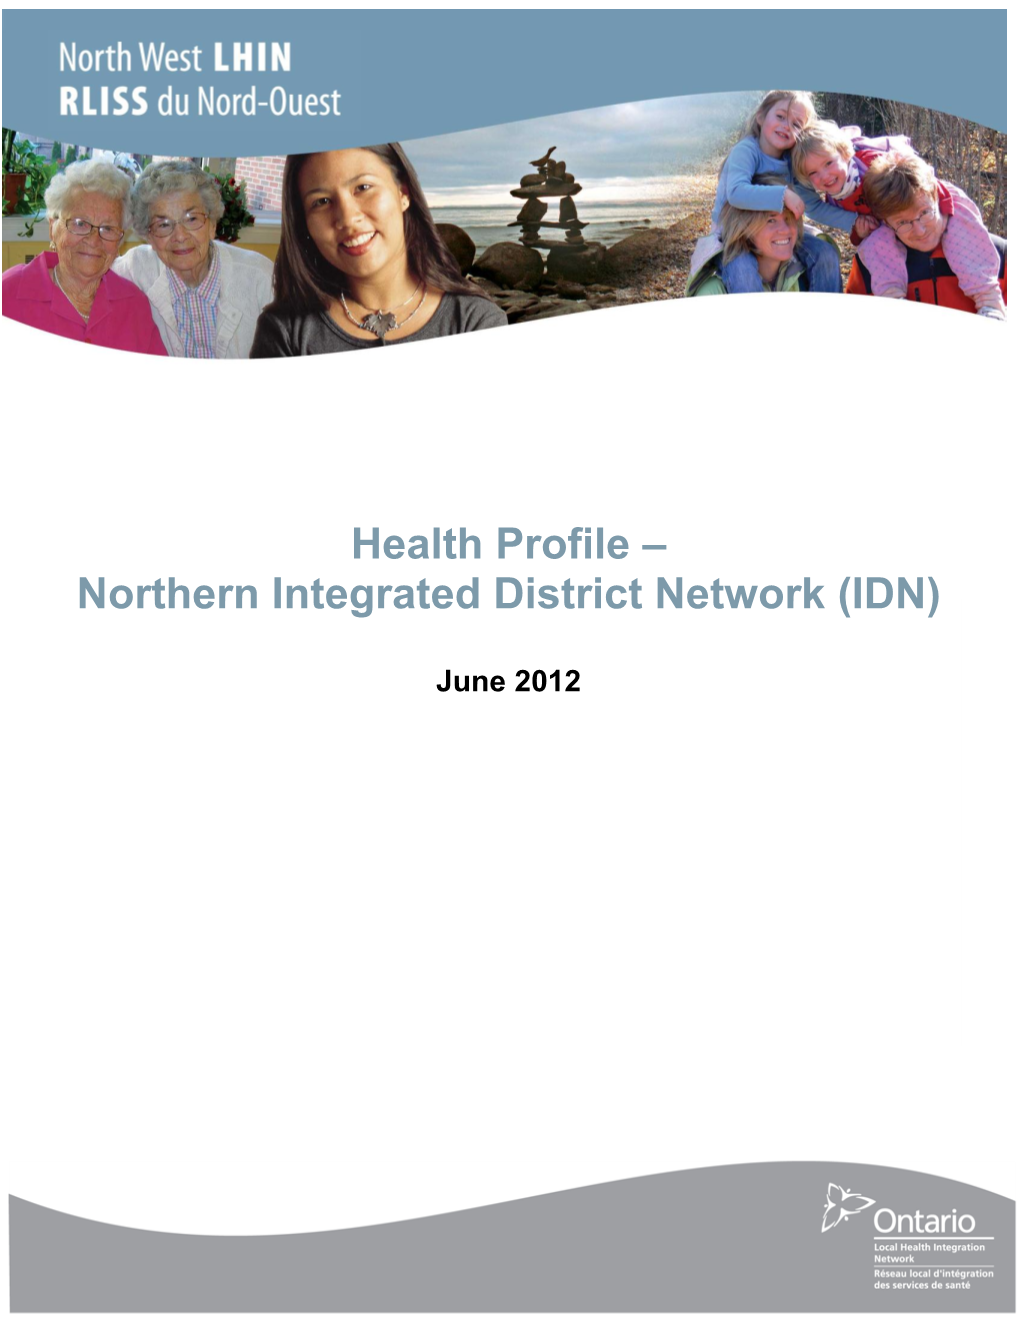 Northern Integrated District Network (IDN)